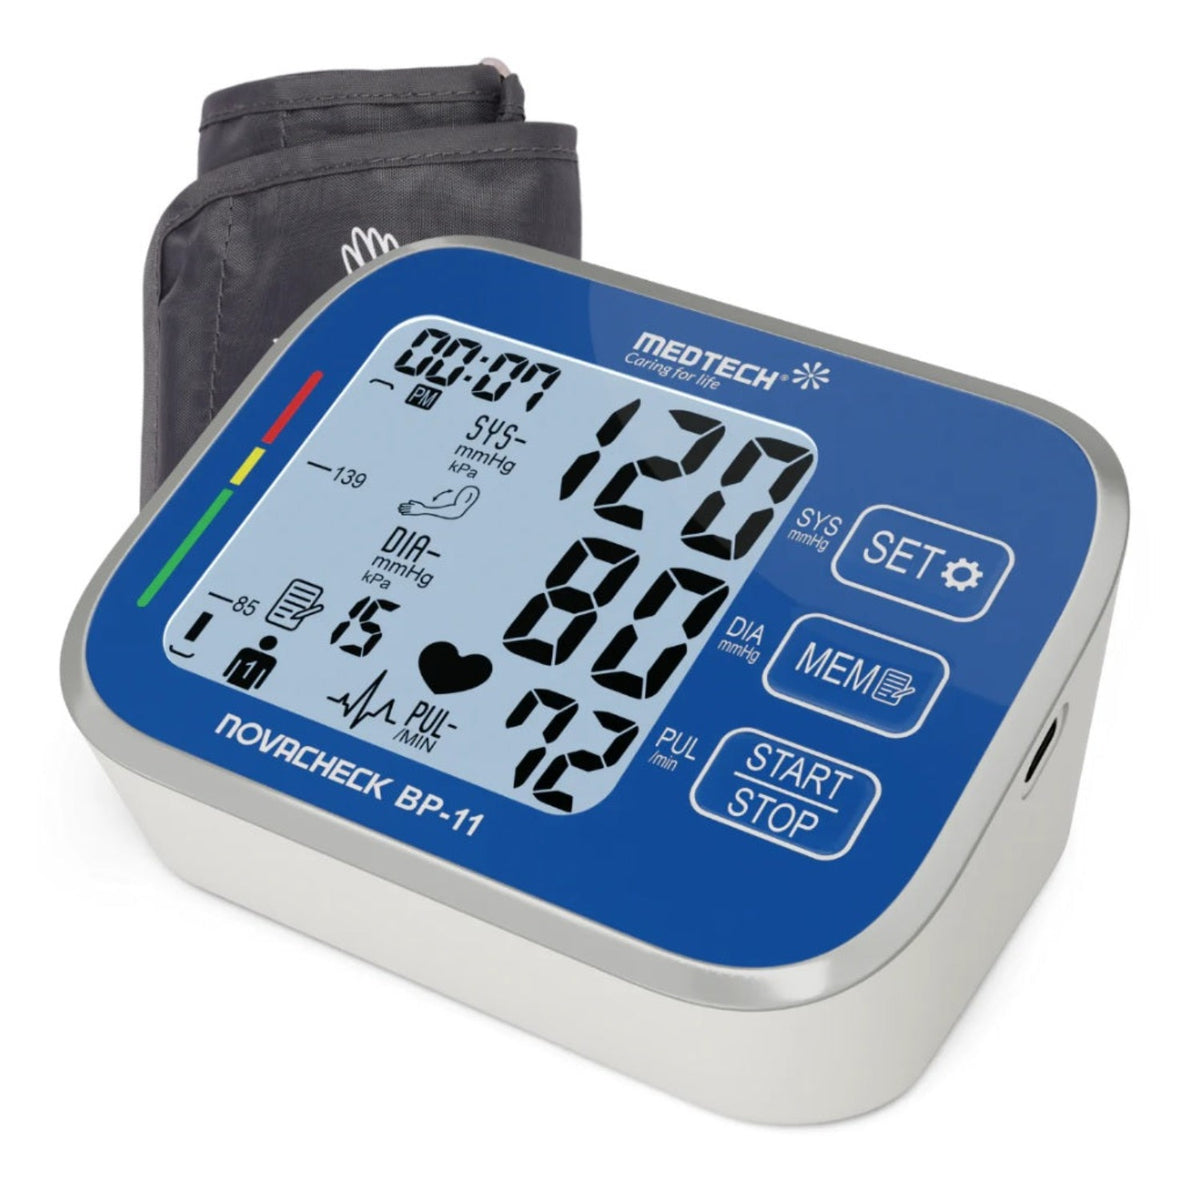 Medtech Automatic Digital BP Machine Blood Pressure Monitor BP11 (with backlight)